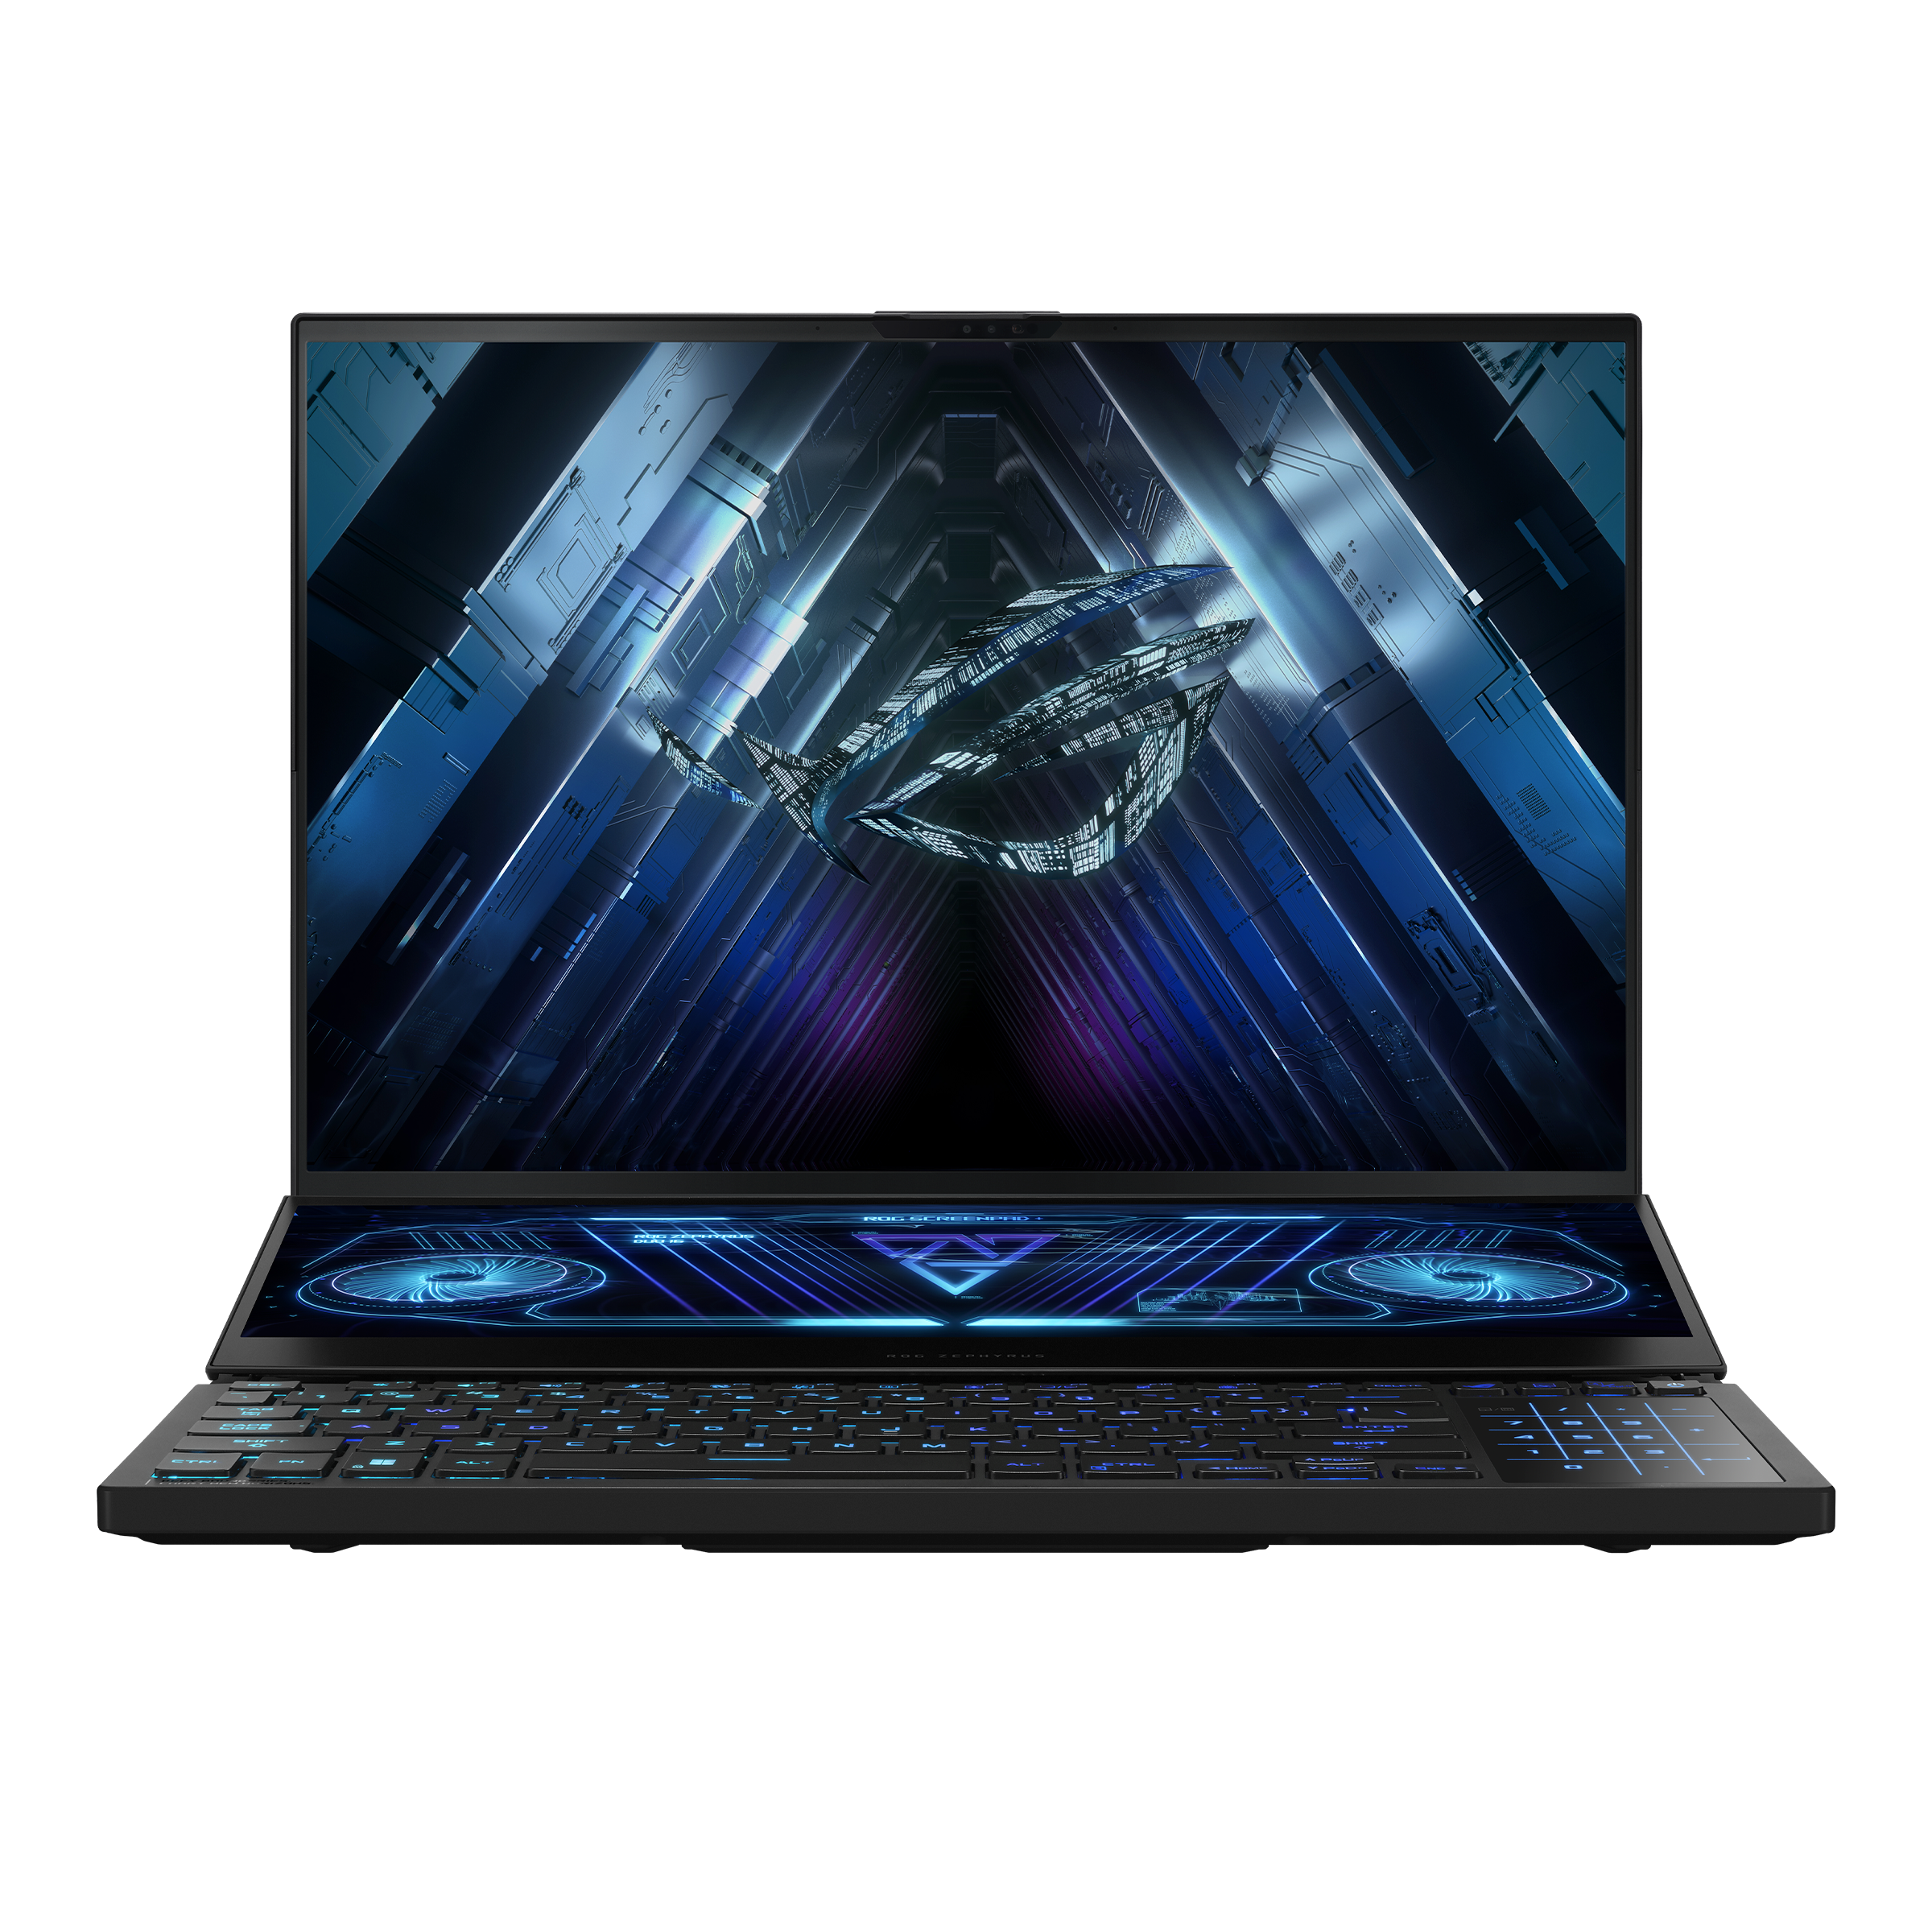 How to set up and optimize your new ROG gaming laptop